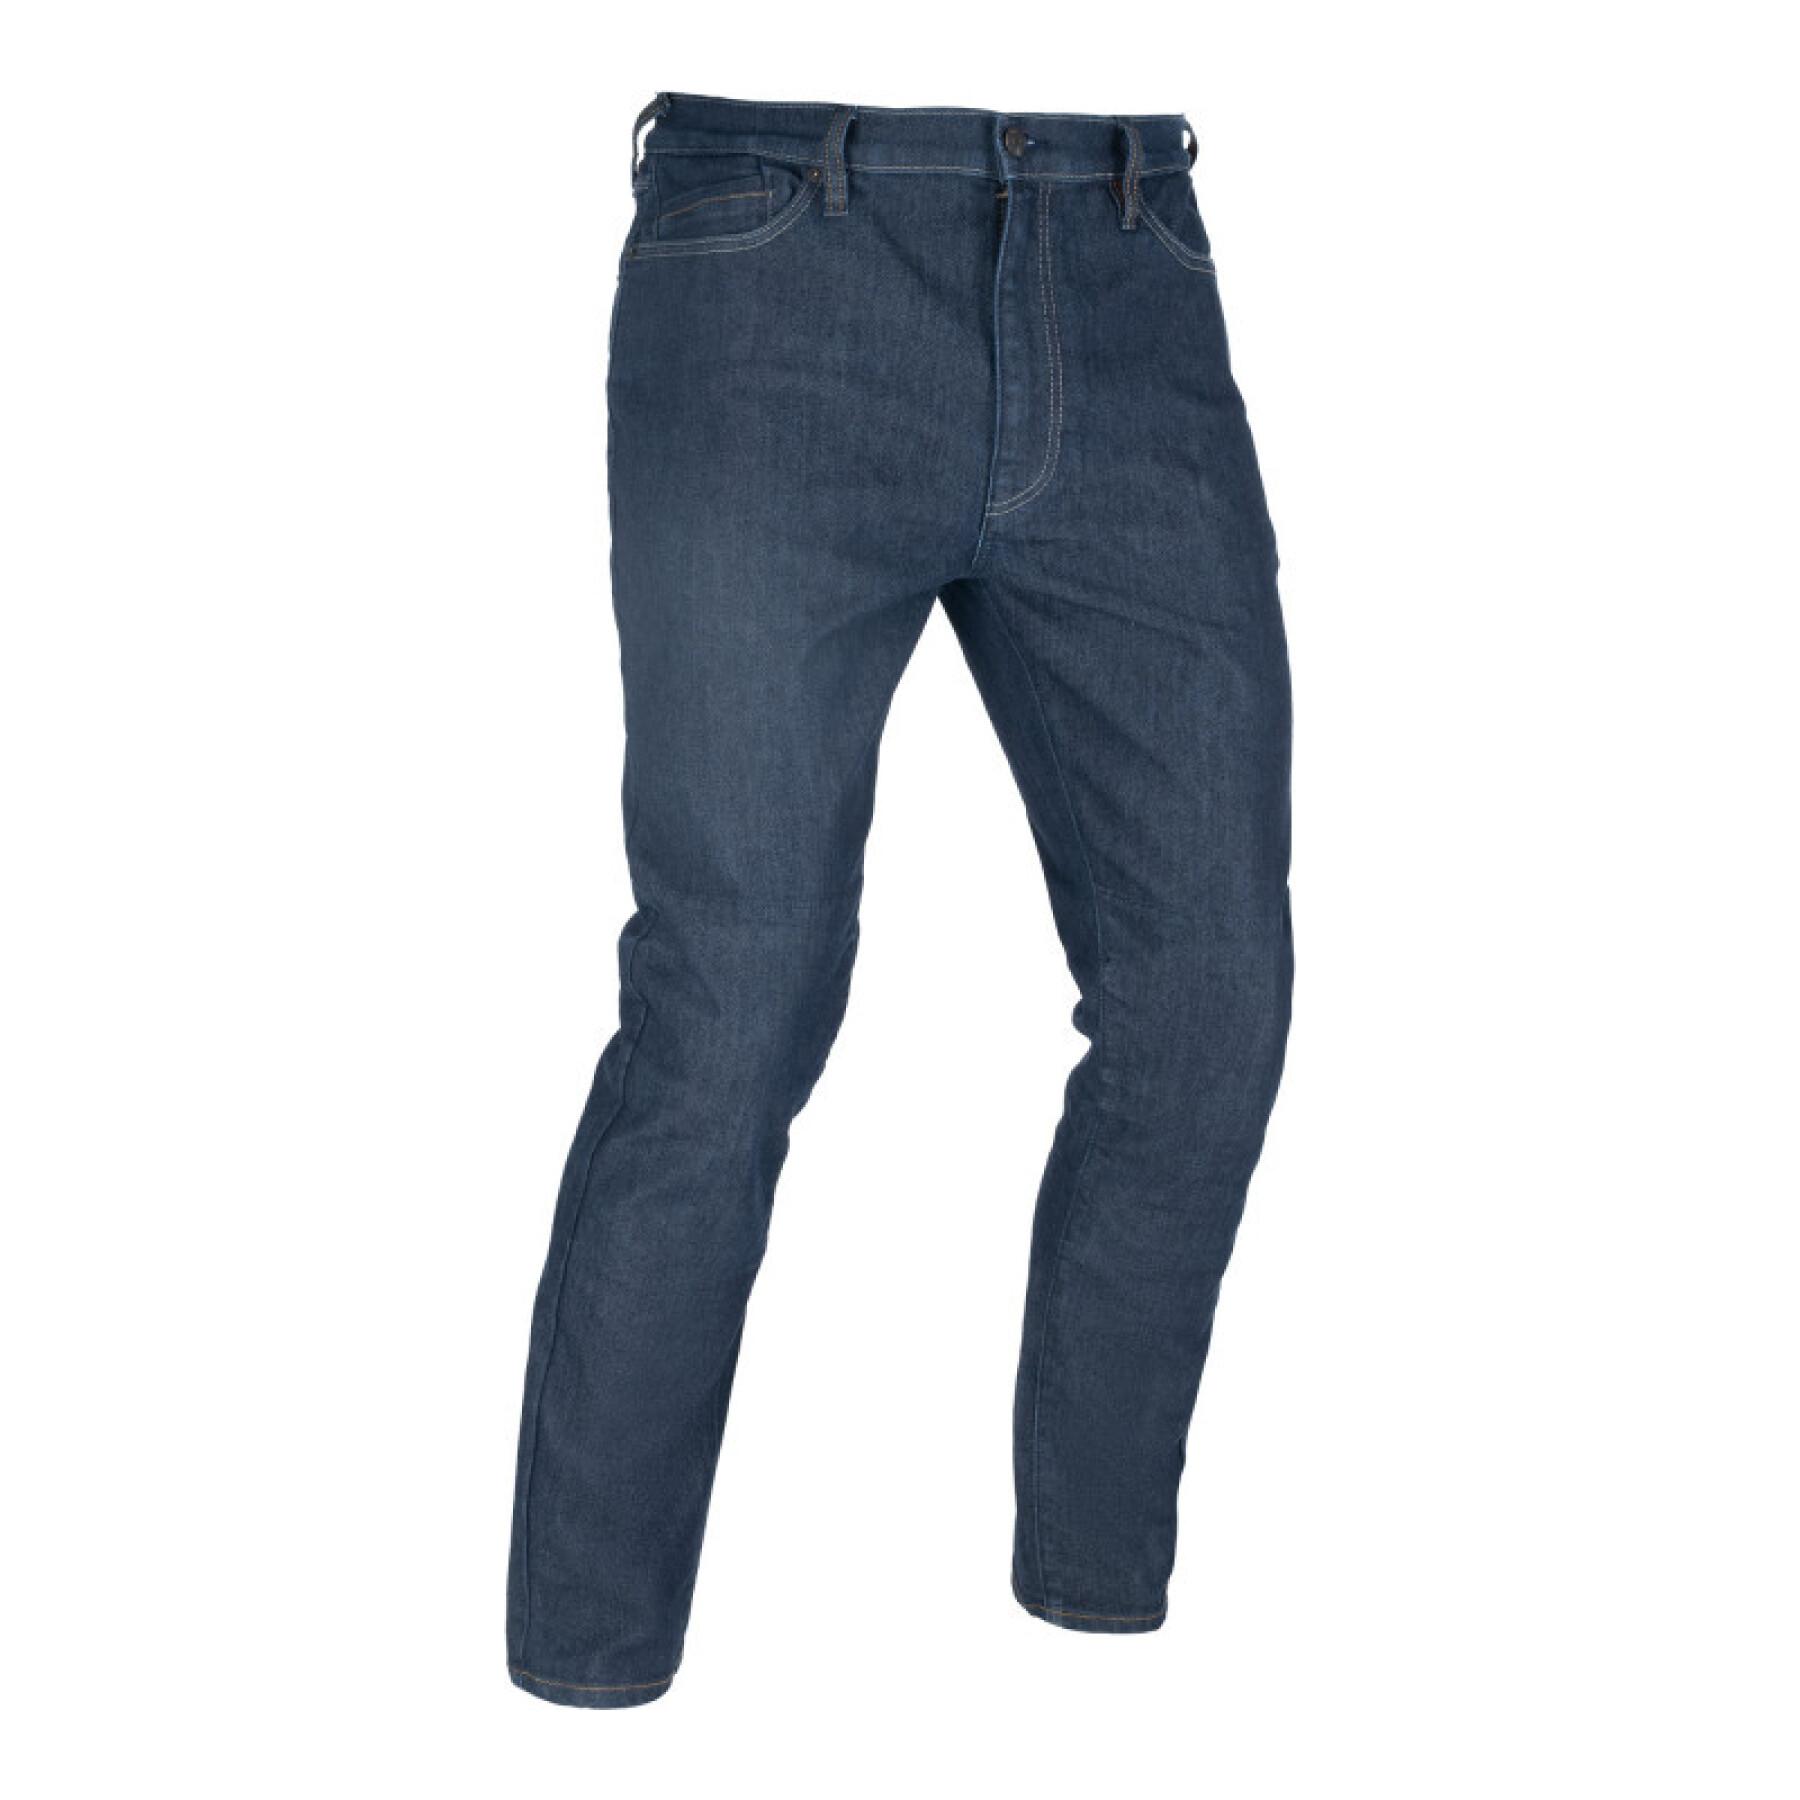 Motorrad-Jeans Oxford Original Approved AA